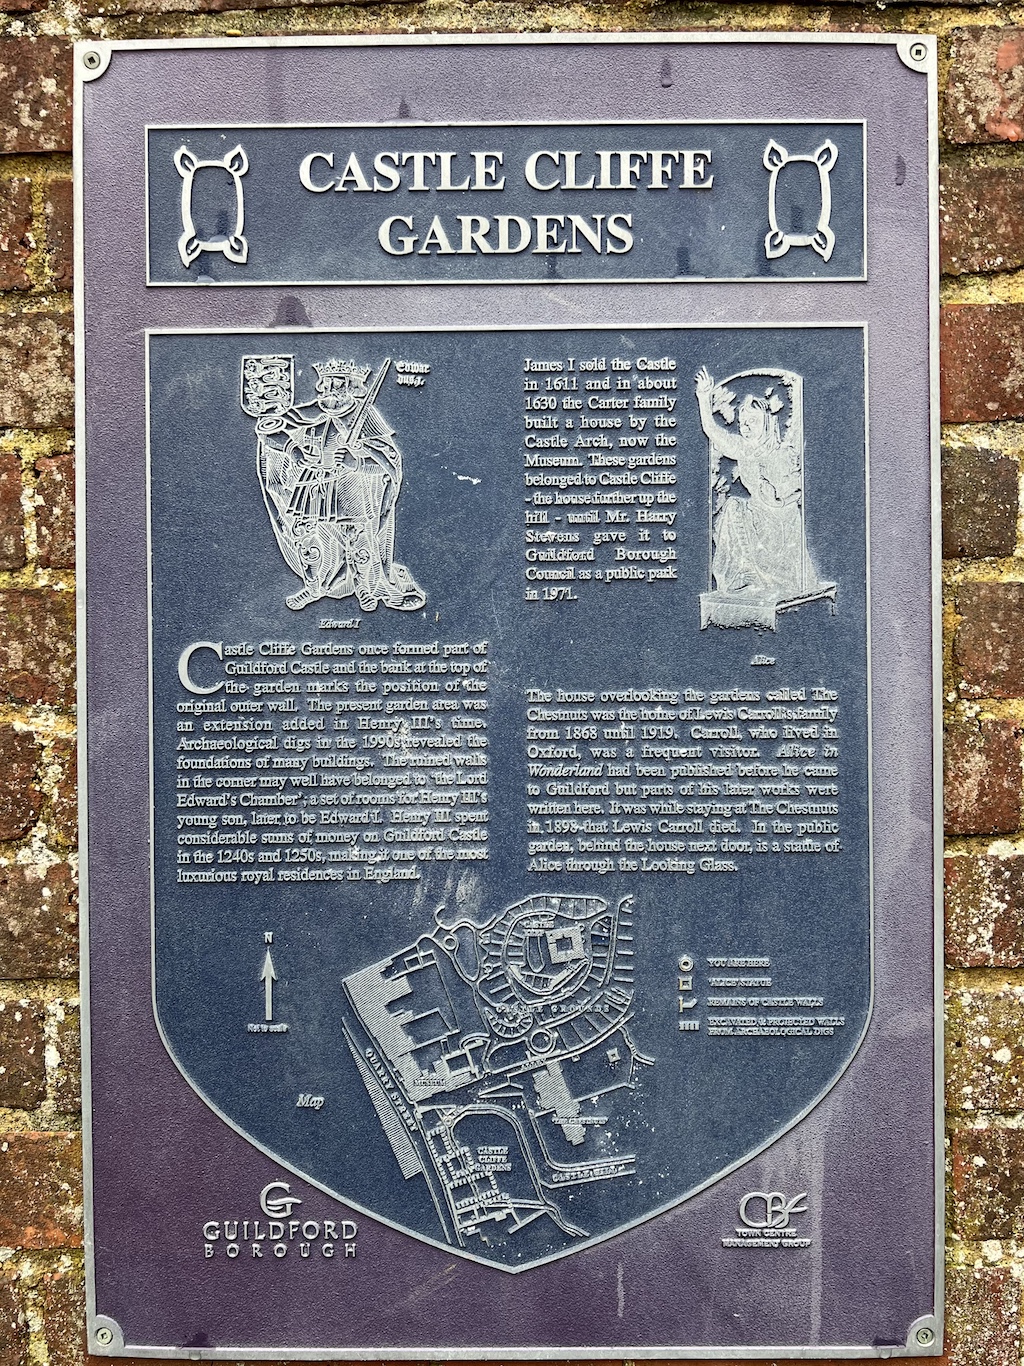 Blue plaque in Guildford for Castle Cliffe Gardens